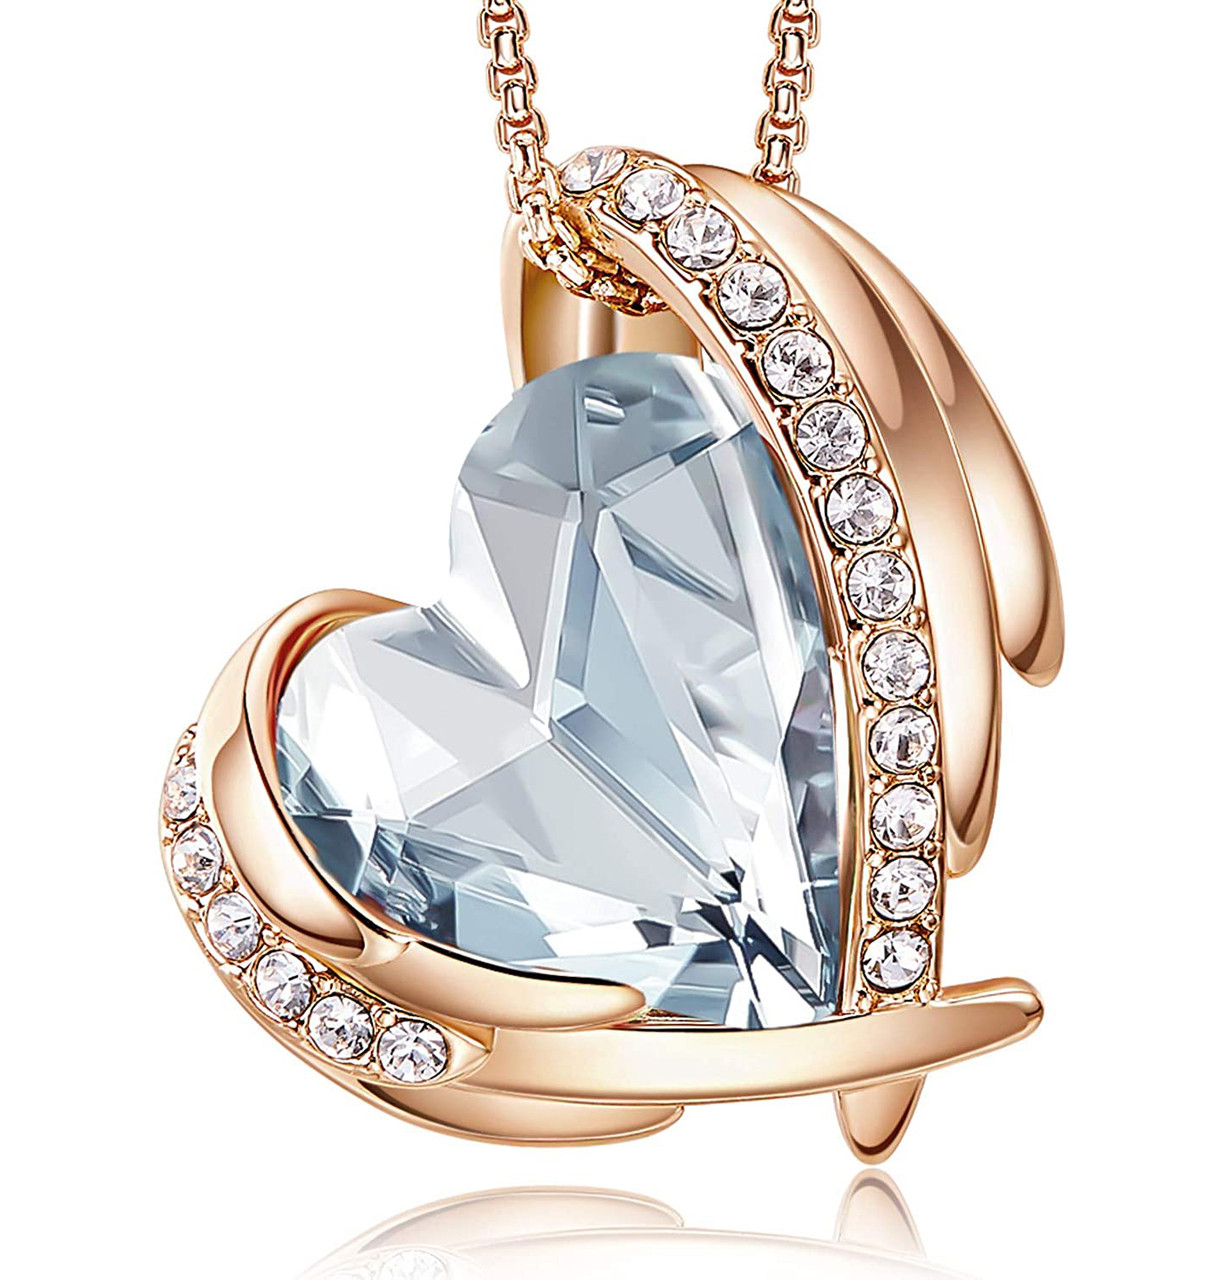 Clear Light Blue Winged Heart Design Crystal Rose Gold Pendant and CZ stones - with 18" Chain Necklace. Gift for Lover, Girl Friend, Wife, Valentine's Day Gift, Mother's Day, Anniversary Gift Heart Necklace.